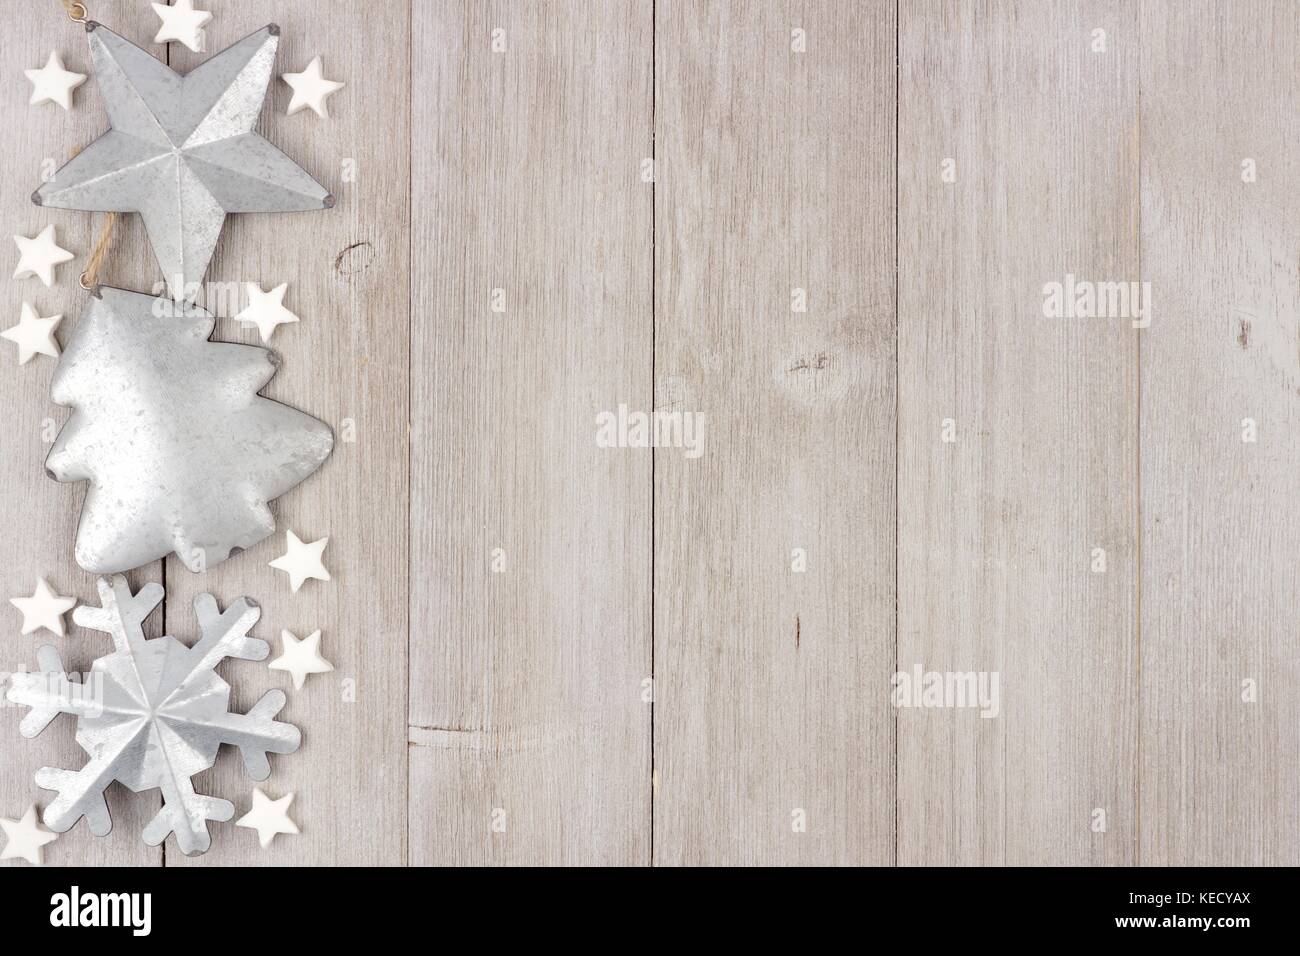 Christmas side border with shabby chic handmade clay and metal ornaments on a rustic wood background Stock Photo